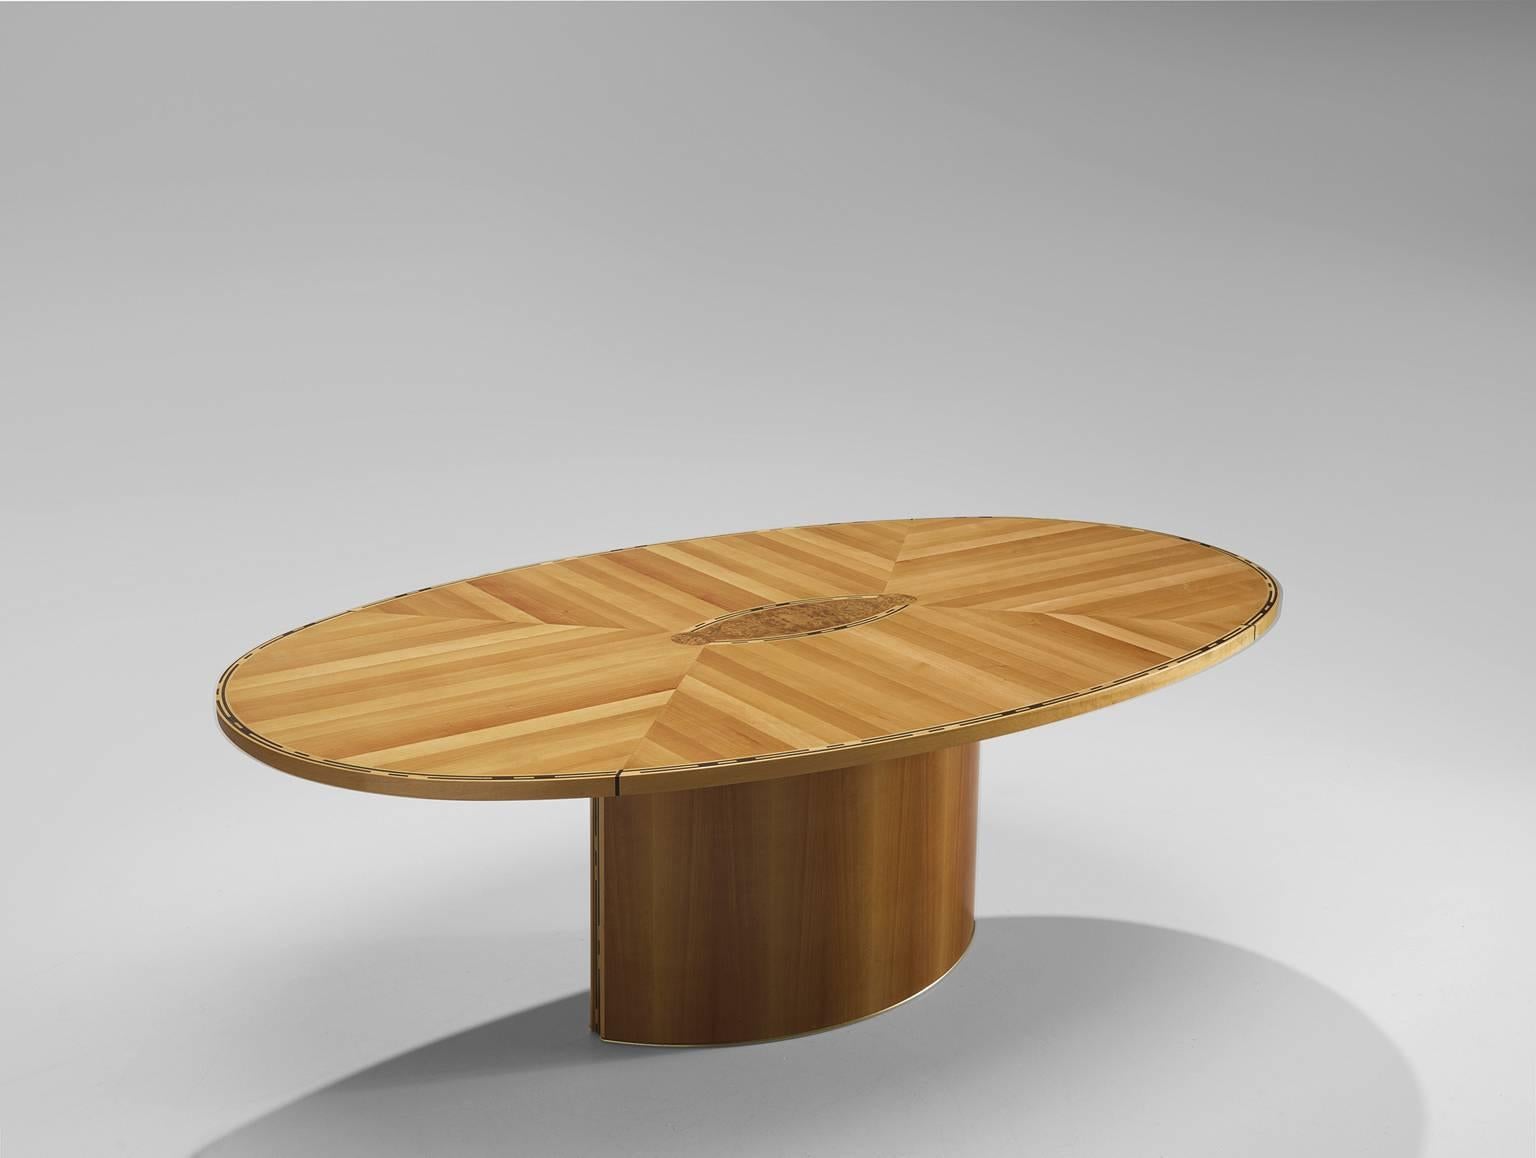 Centre table, wood and brass, Italy, 1980s.

This sculptural oval table is decorative and at the same time simplistic. The decorativeness is displayed in the top where the planks are laid out right-angled. Through this pattern a very lively, collage